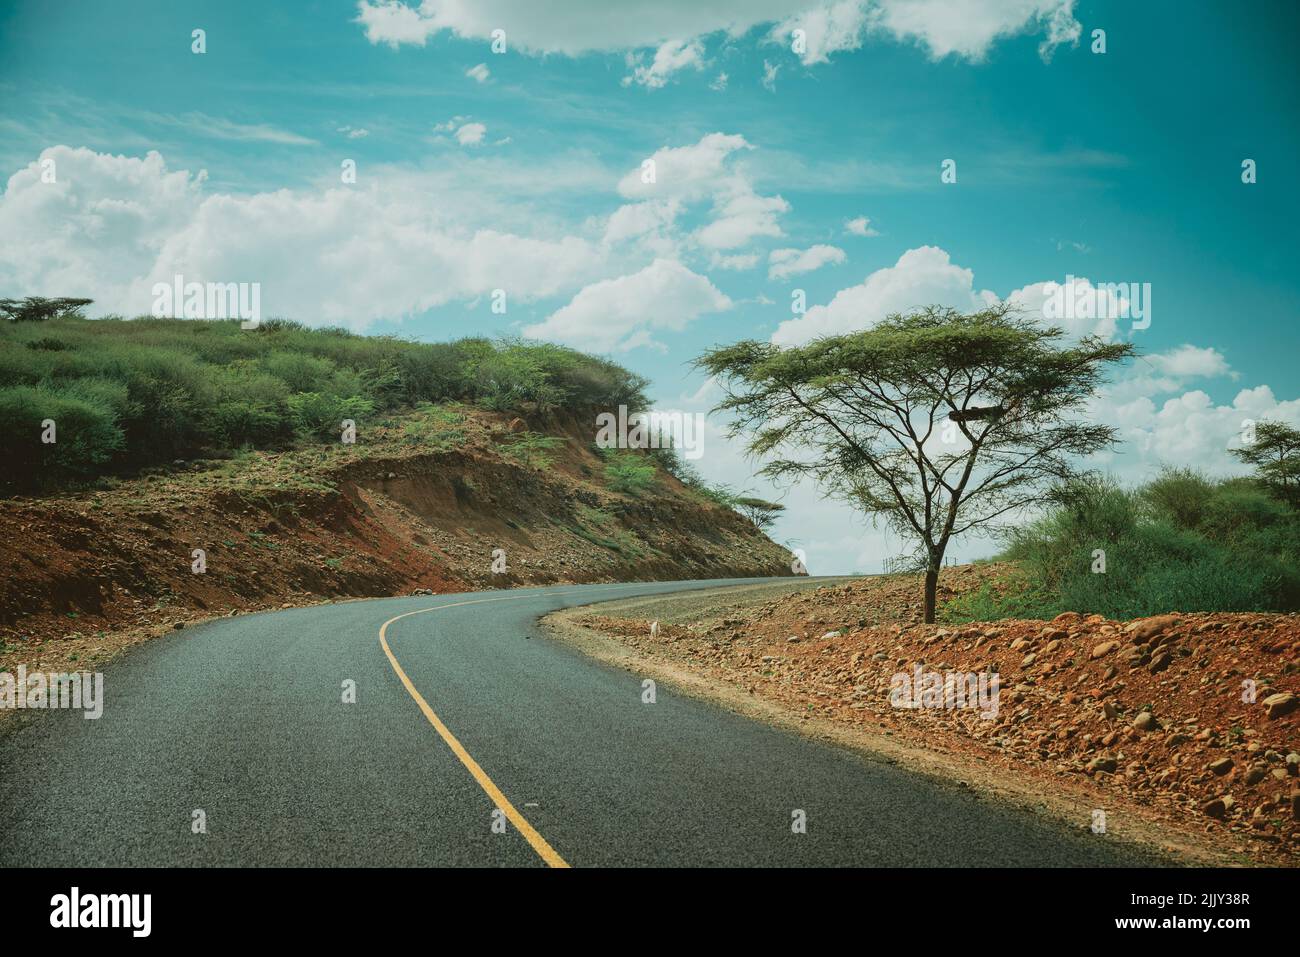 Travel in Africa, acacia tree by the rough road lined with red soil. Stock Photo